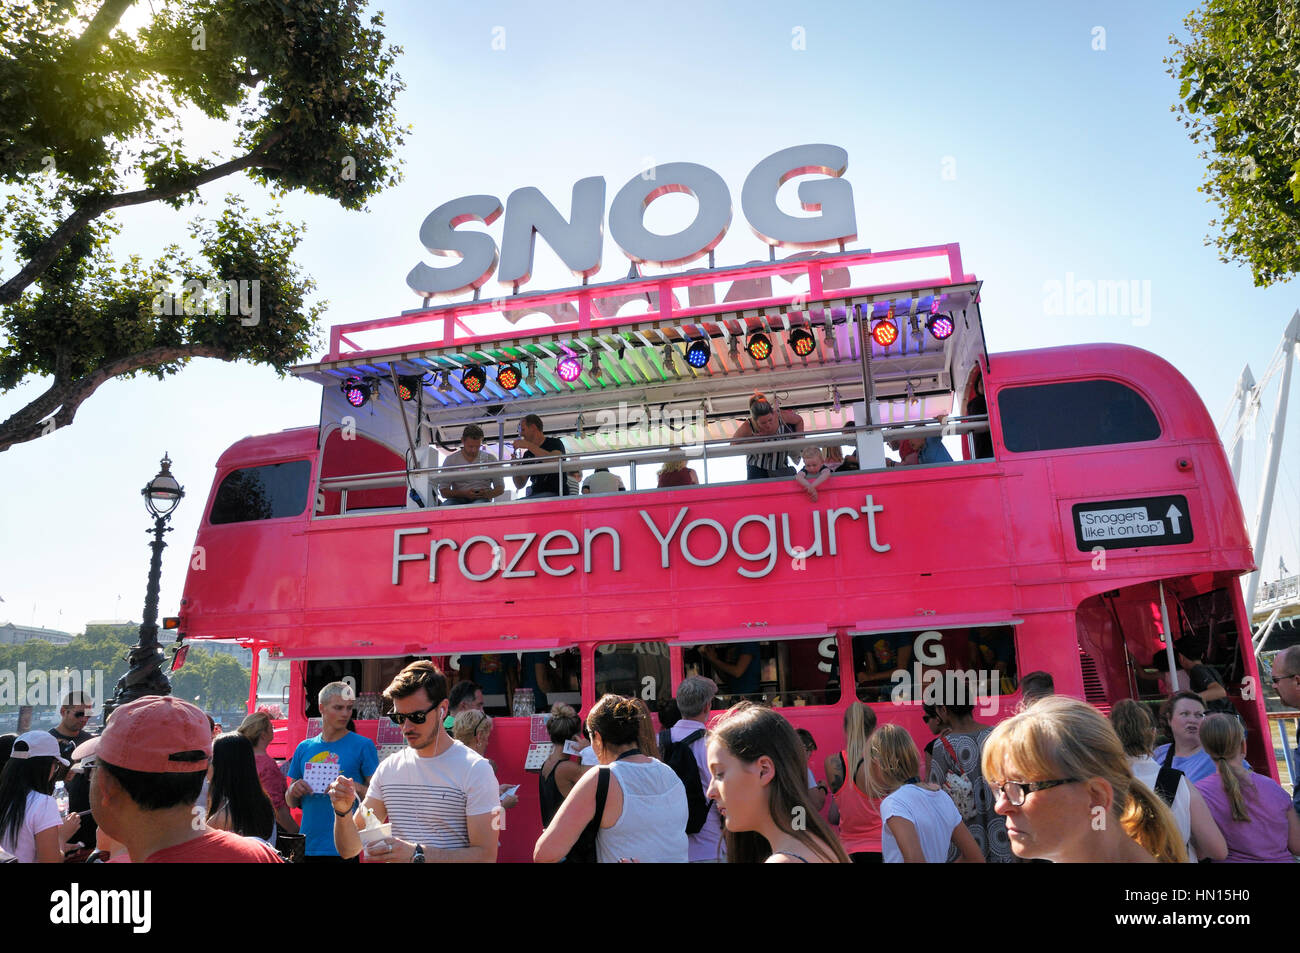 Snog Frozen Yogurt pink Routemaster bus drawing the customers on a beautiful summer's day on London's South Bank Stock Photo